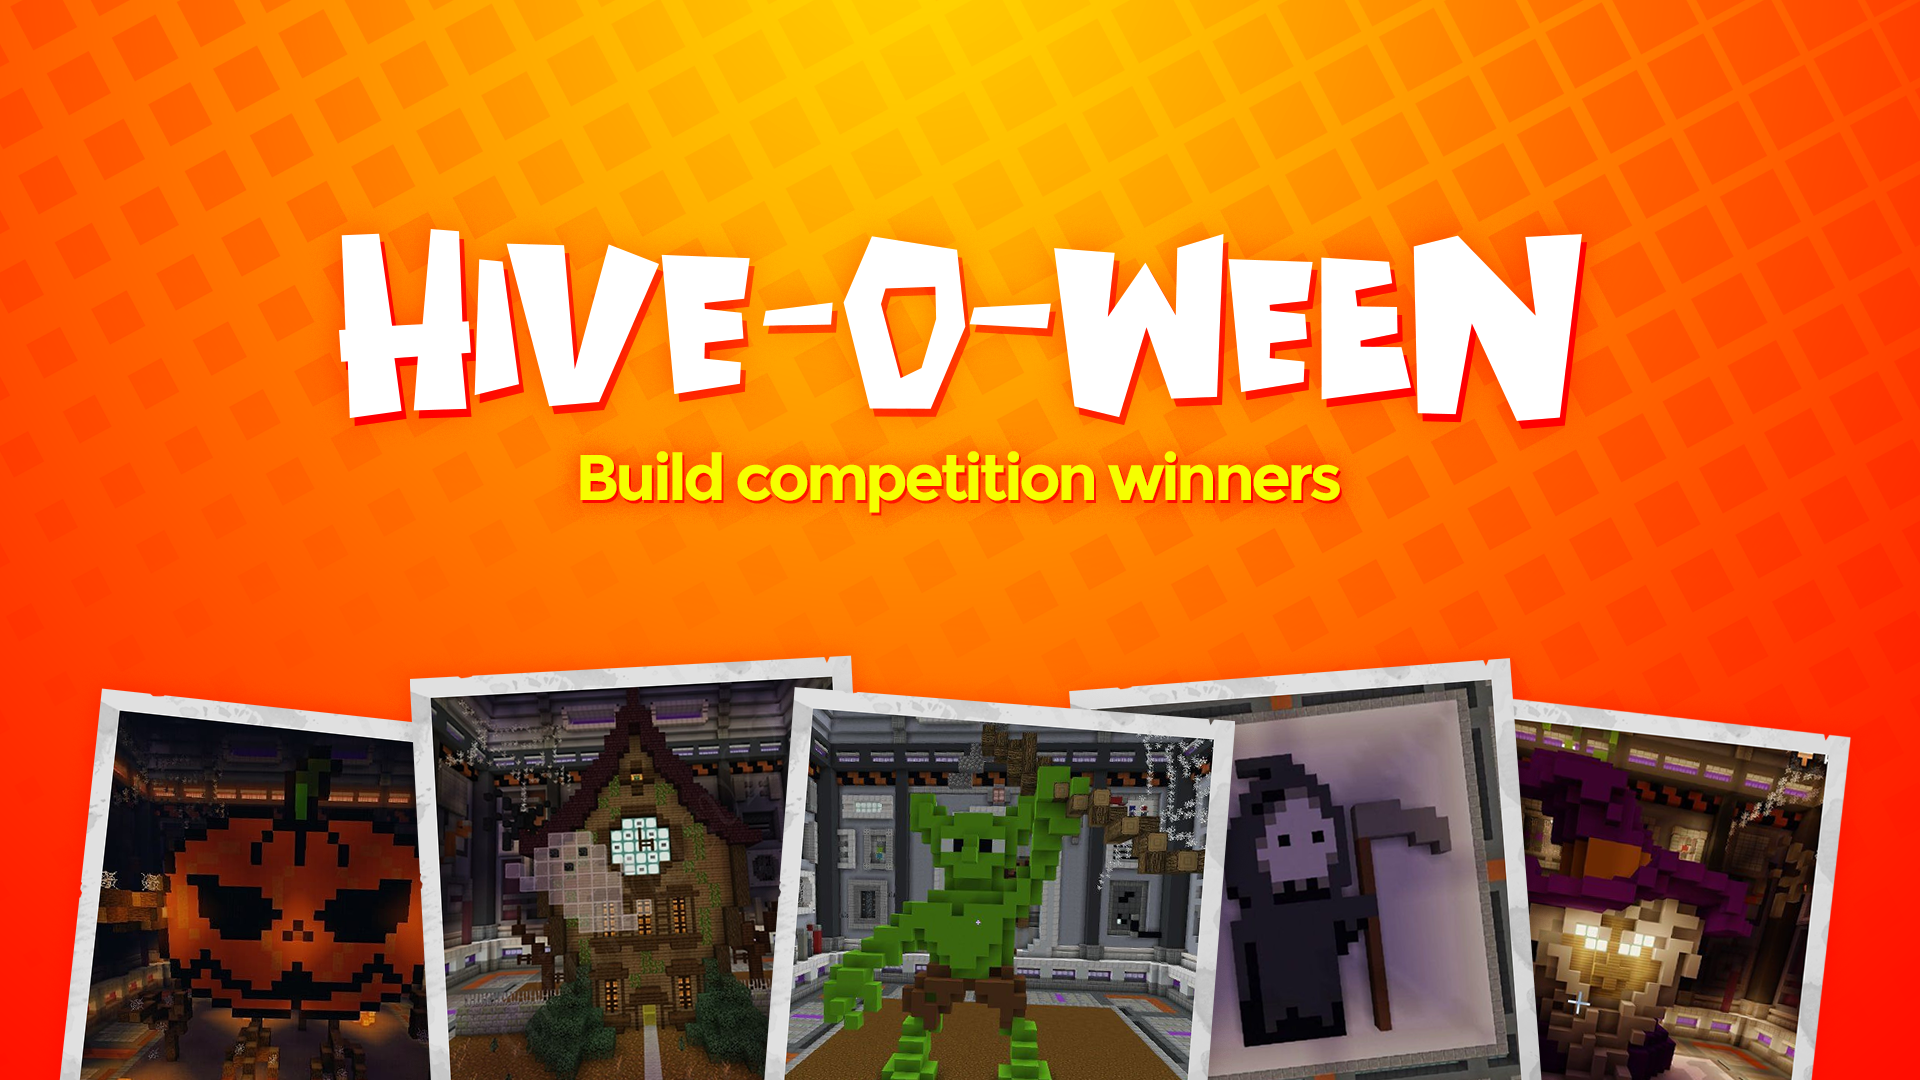 Hive-o-ween Just Build Competition Winners!